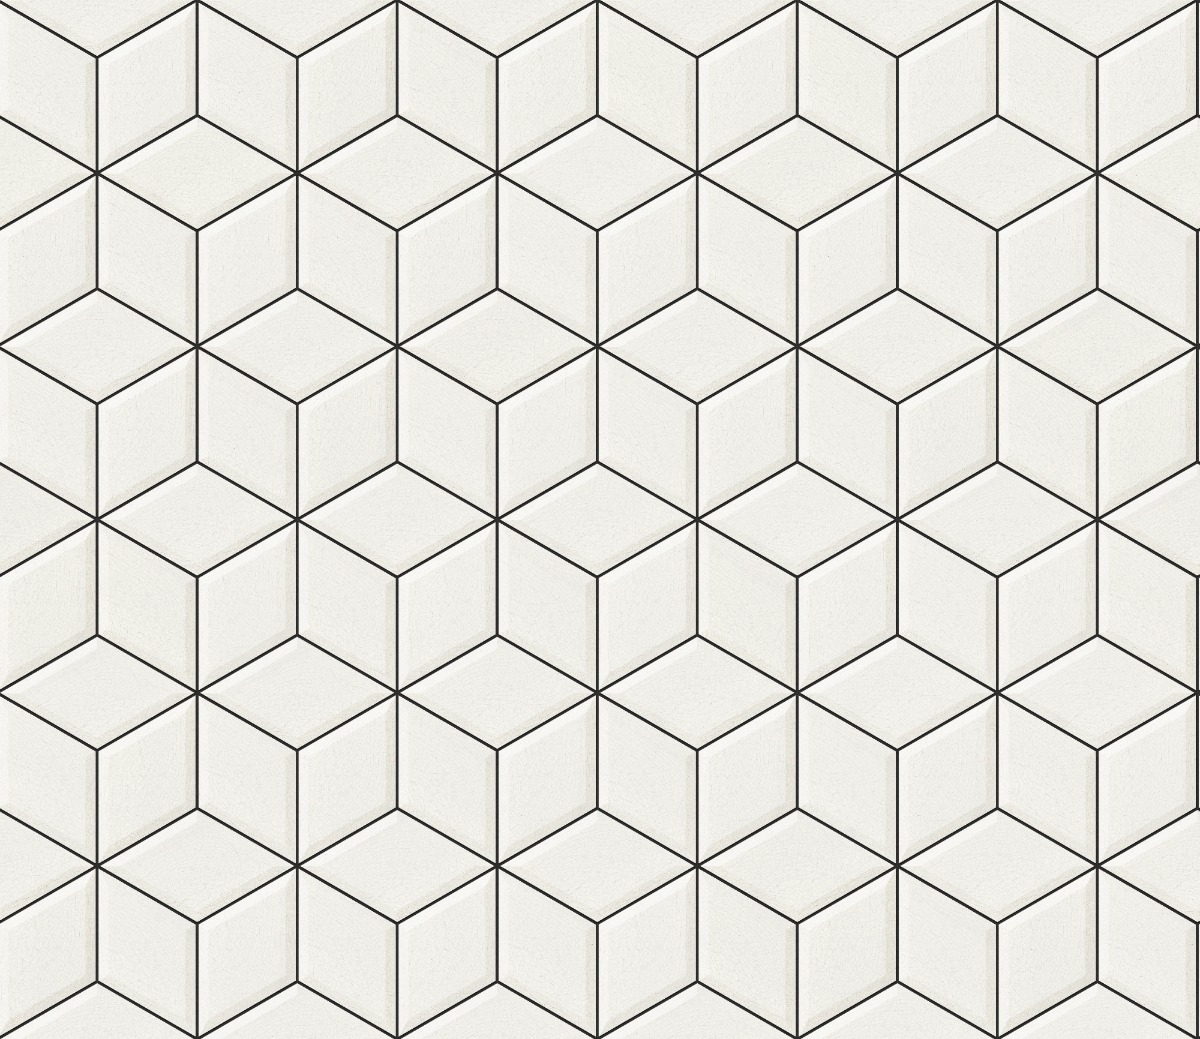 A seamless tile texture with crazing tile tiles arranged in a Cubic pattern